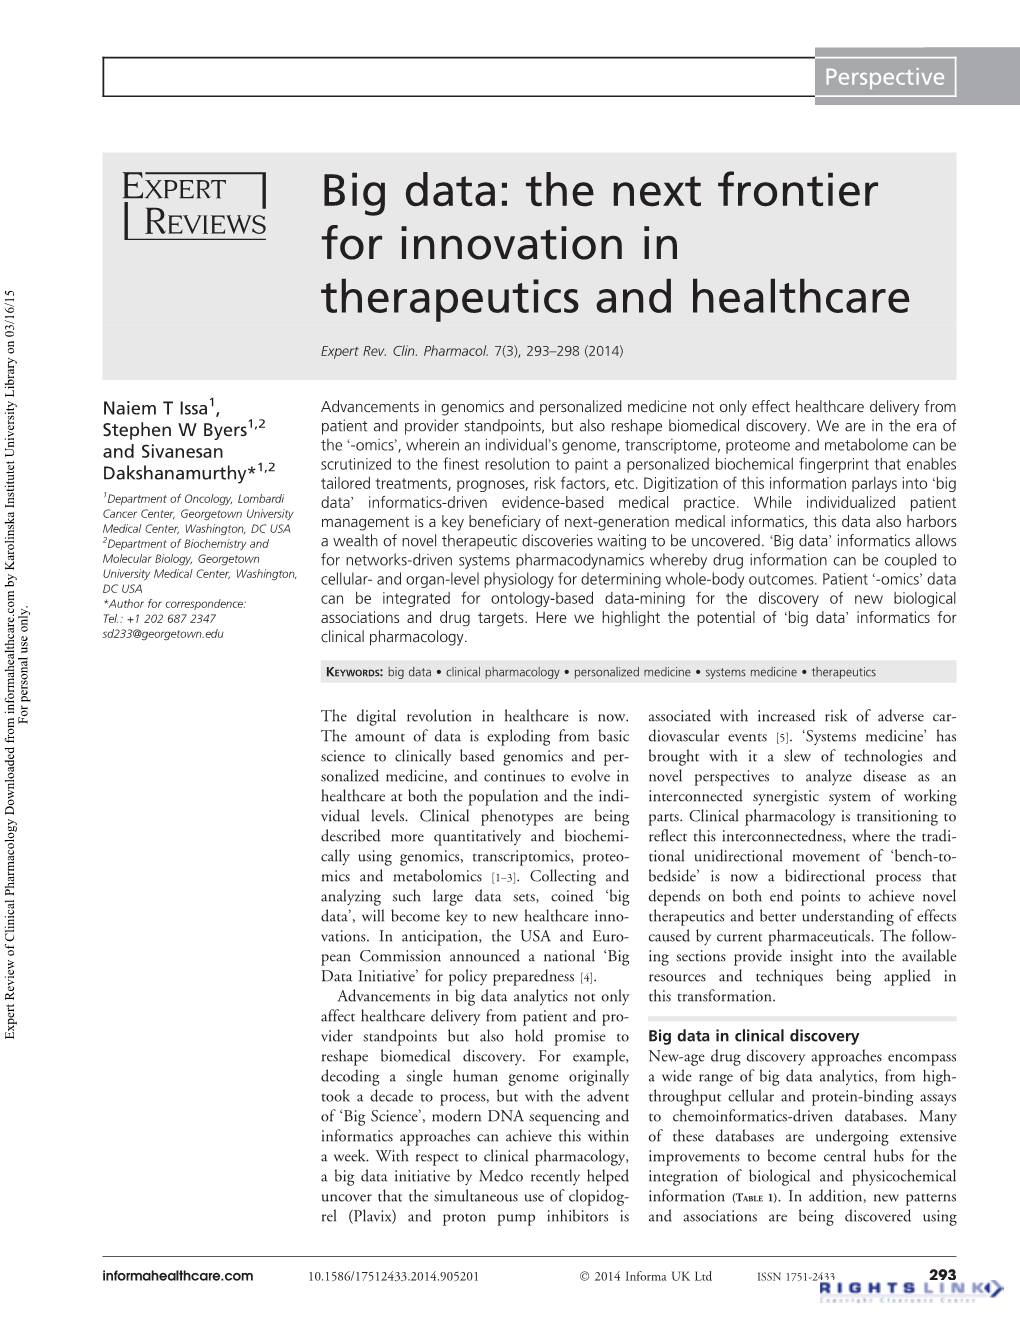 Big Data: the Next Frontier for Innovation in Therapeutics and Healthcare